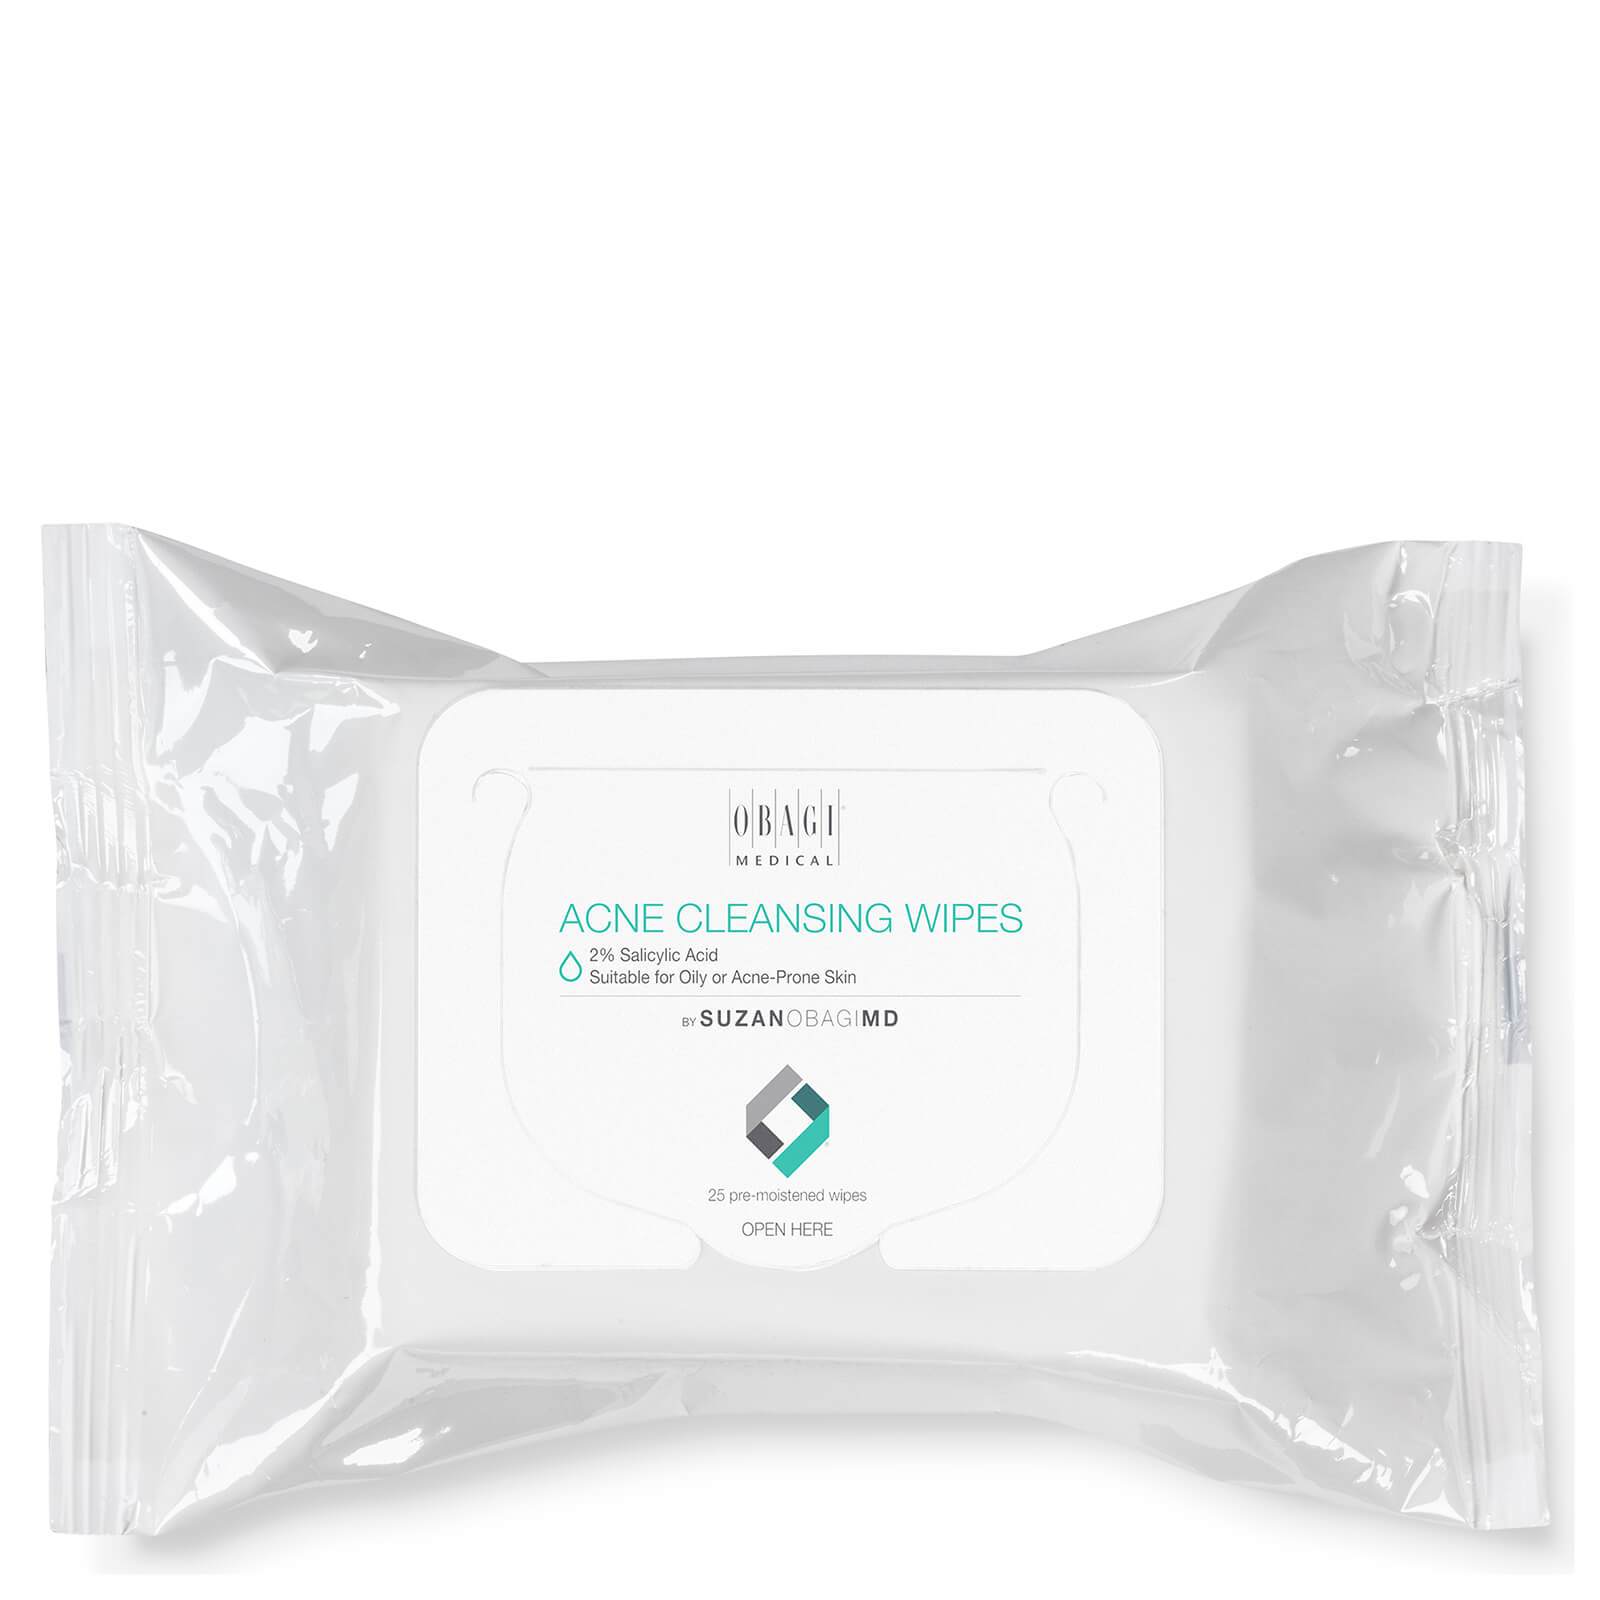 SUZANOBAGIMD On the Go Acne Cleansing Wipes (25 Count)